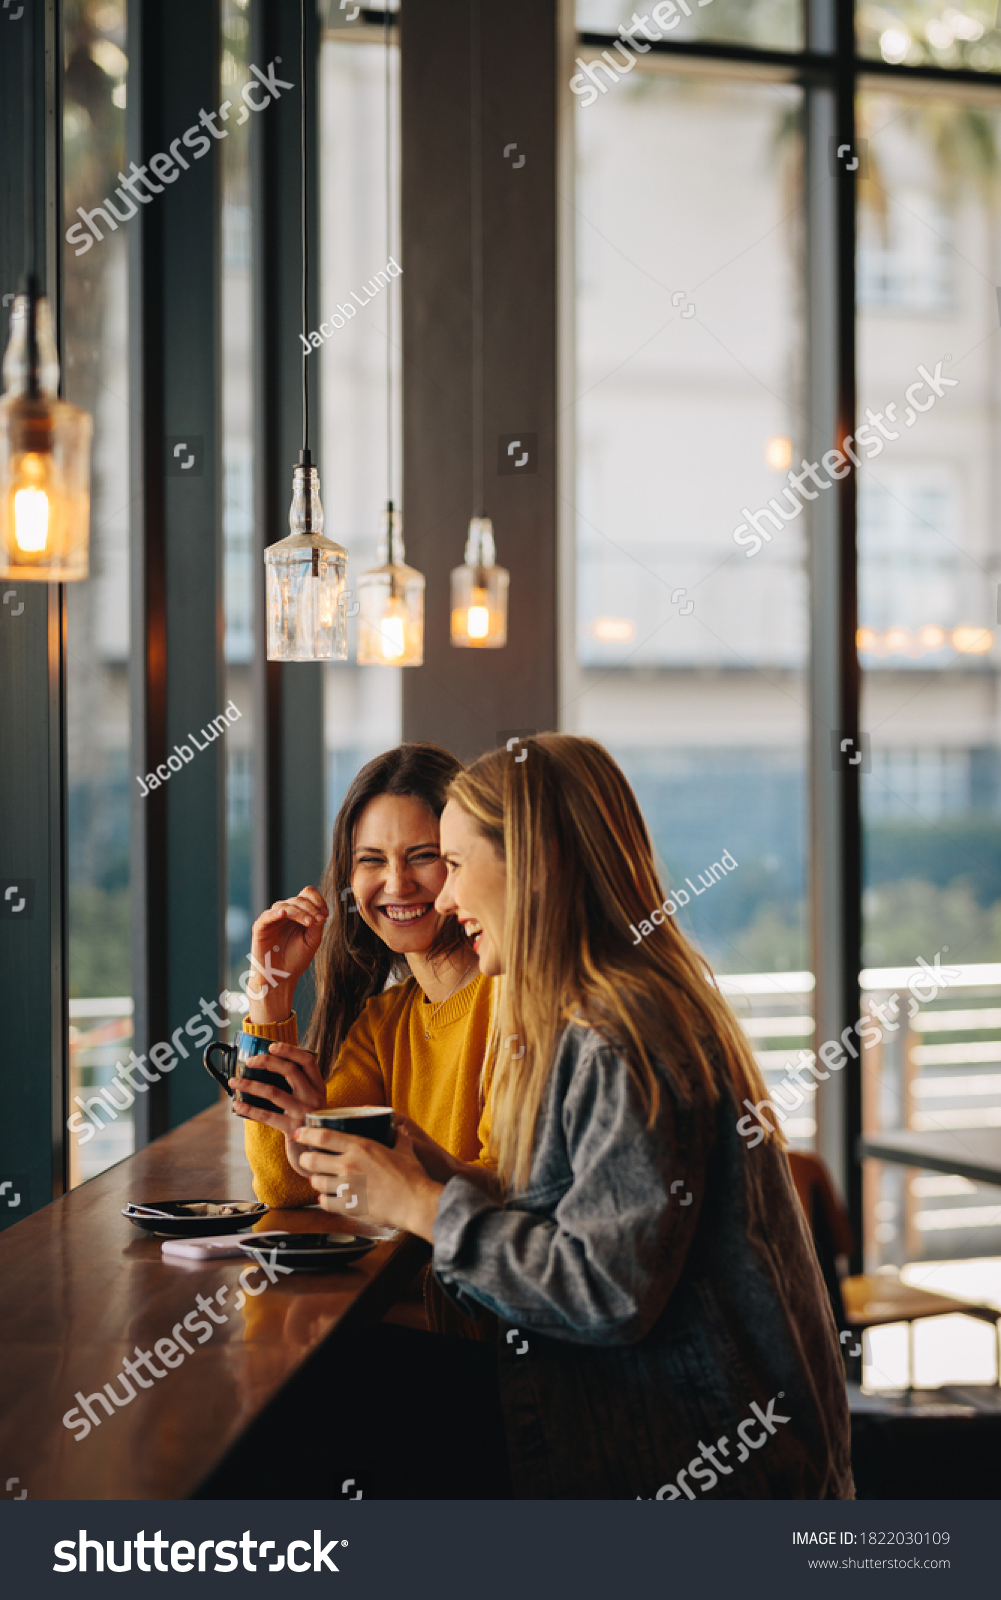 Cheerful female friends sitting together at cafe table. Smiling women meeting in a coffee shop and chatting. #1822030109